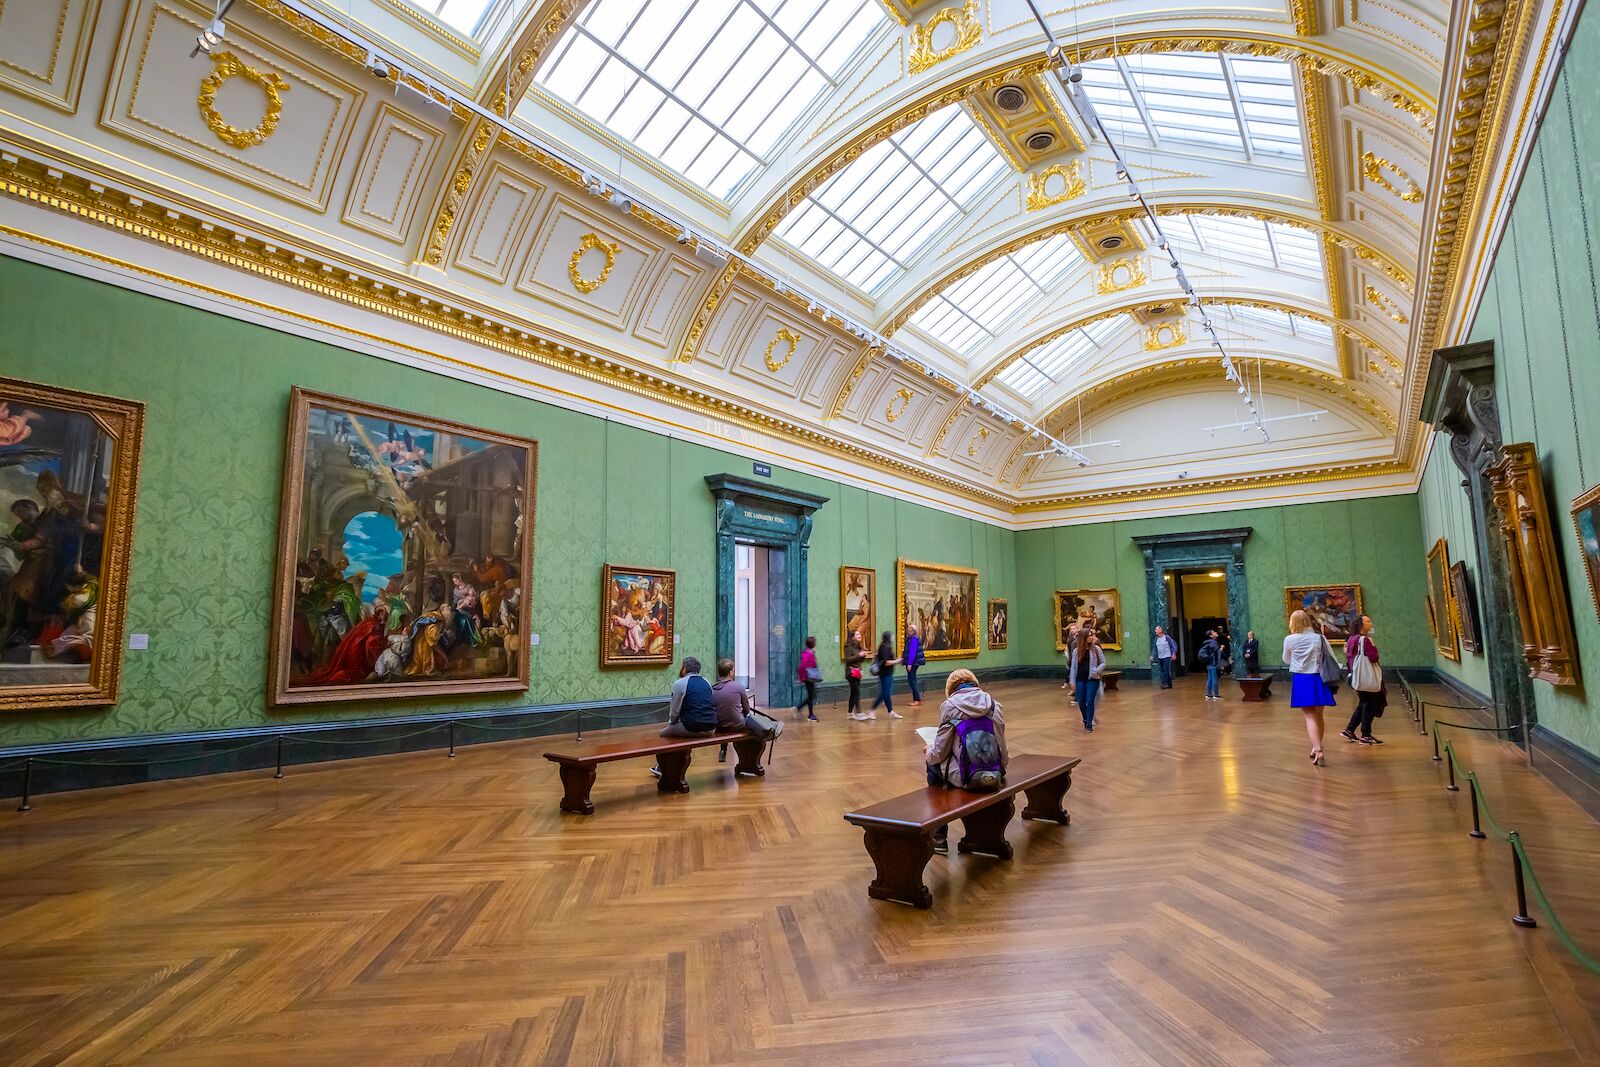 Inside the National Gallery, one of London's best museums